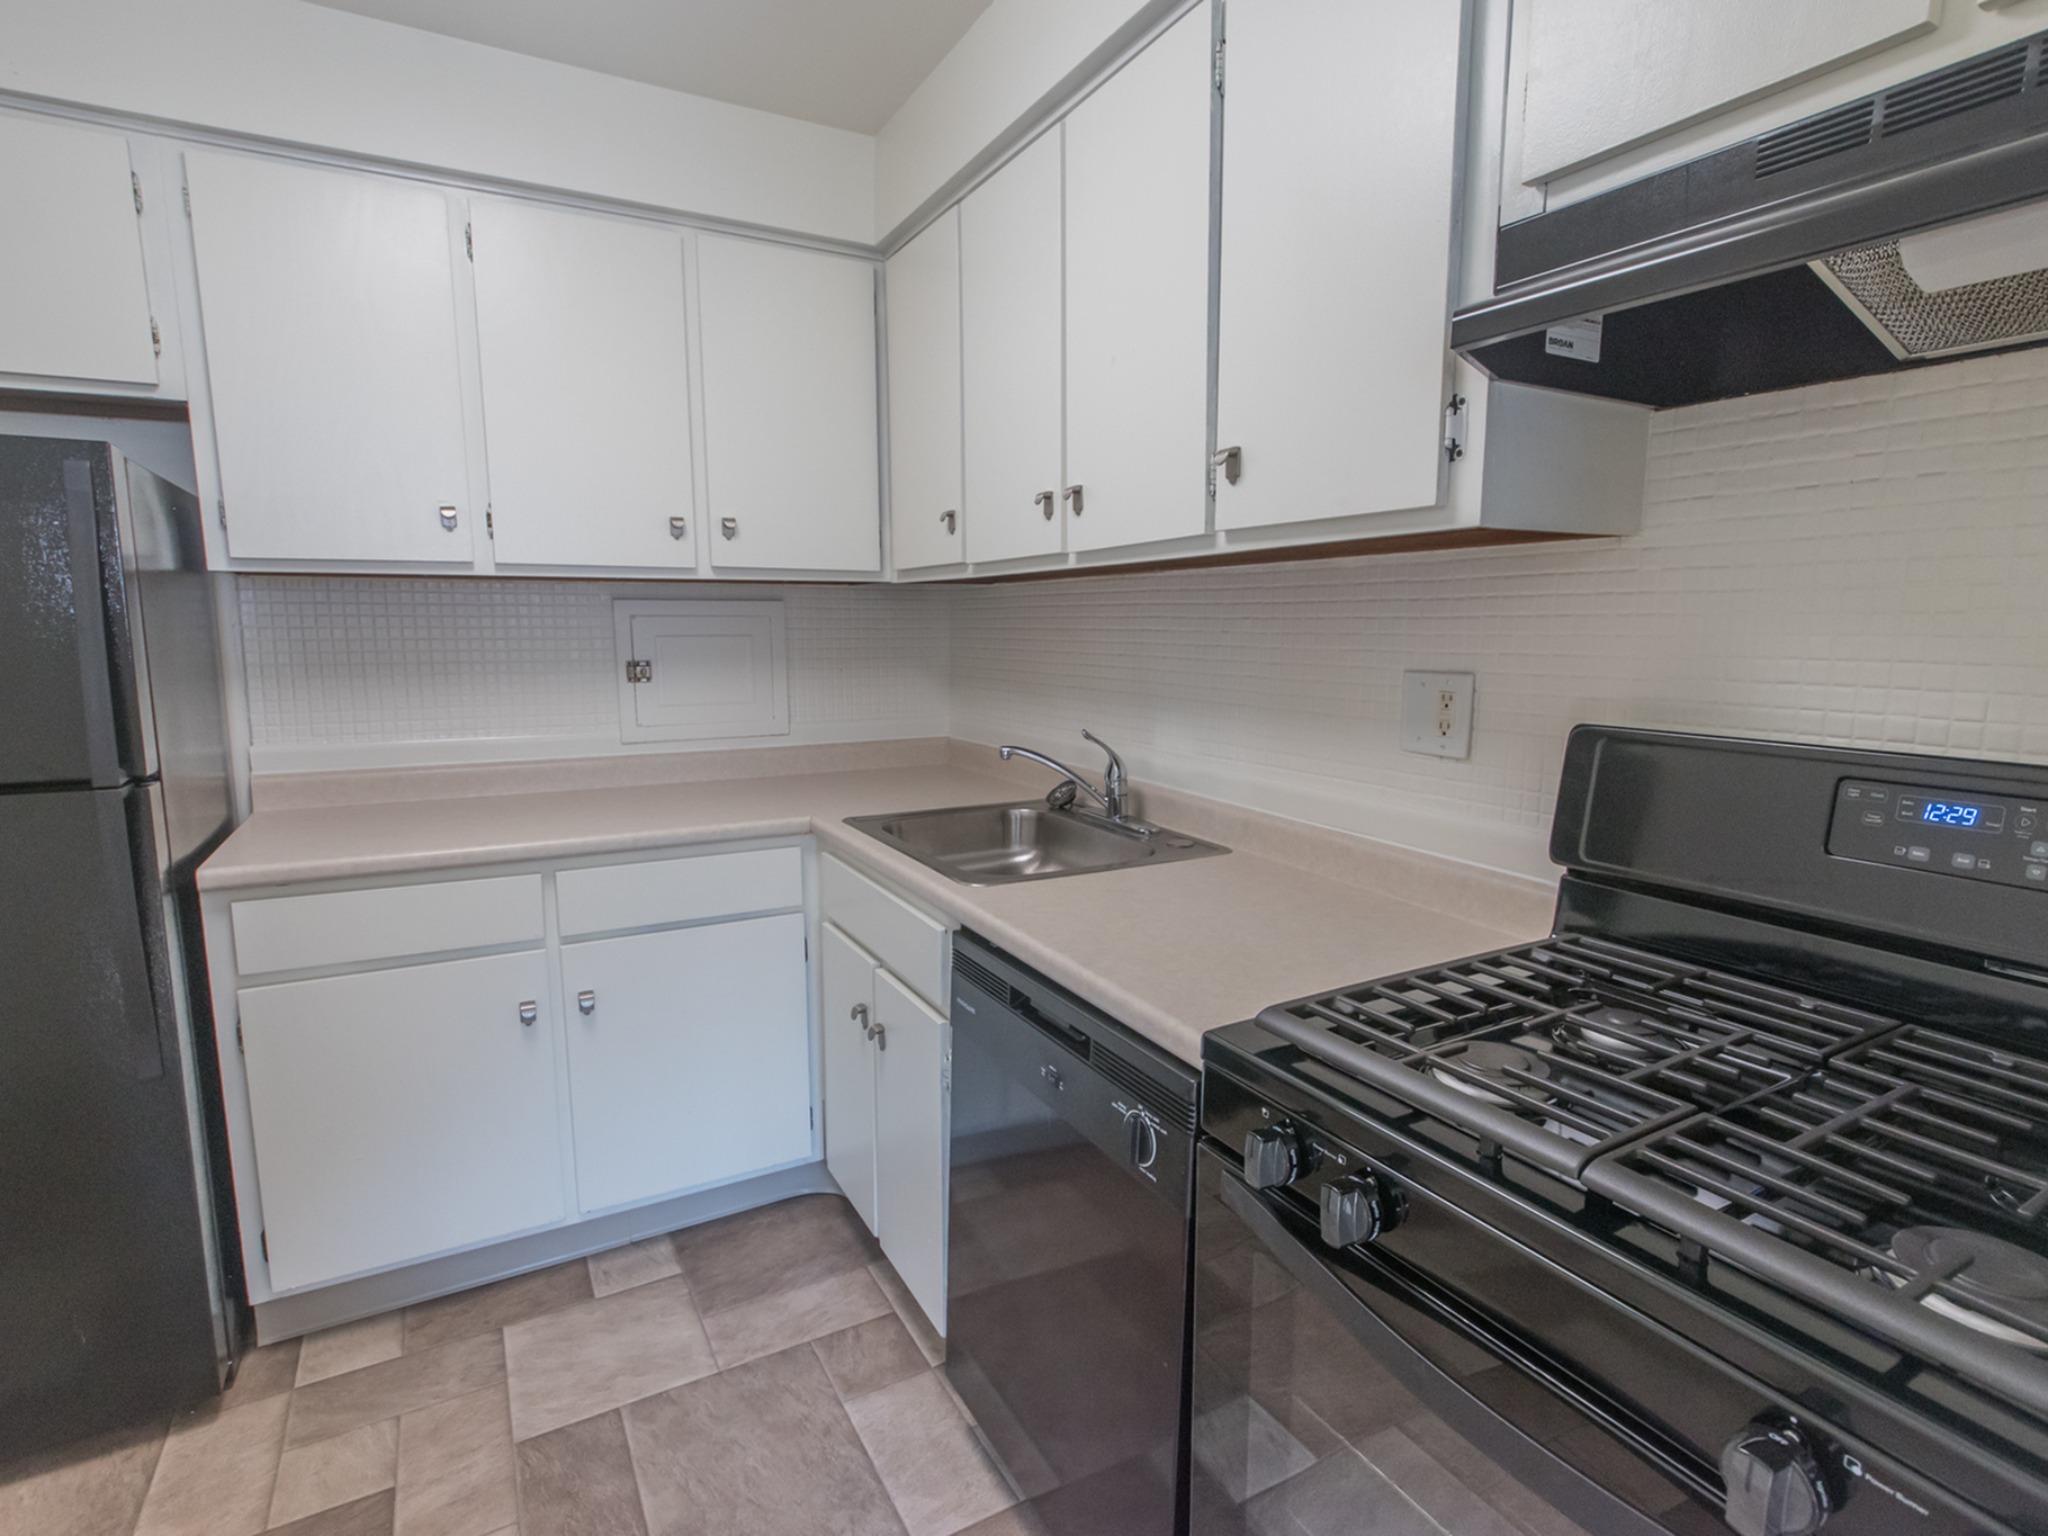 Kitchen area of an apartment, fitted with vinyl flooring, spacious cabinets, a fridge, and a stove